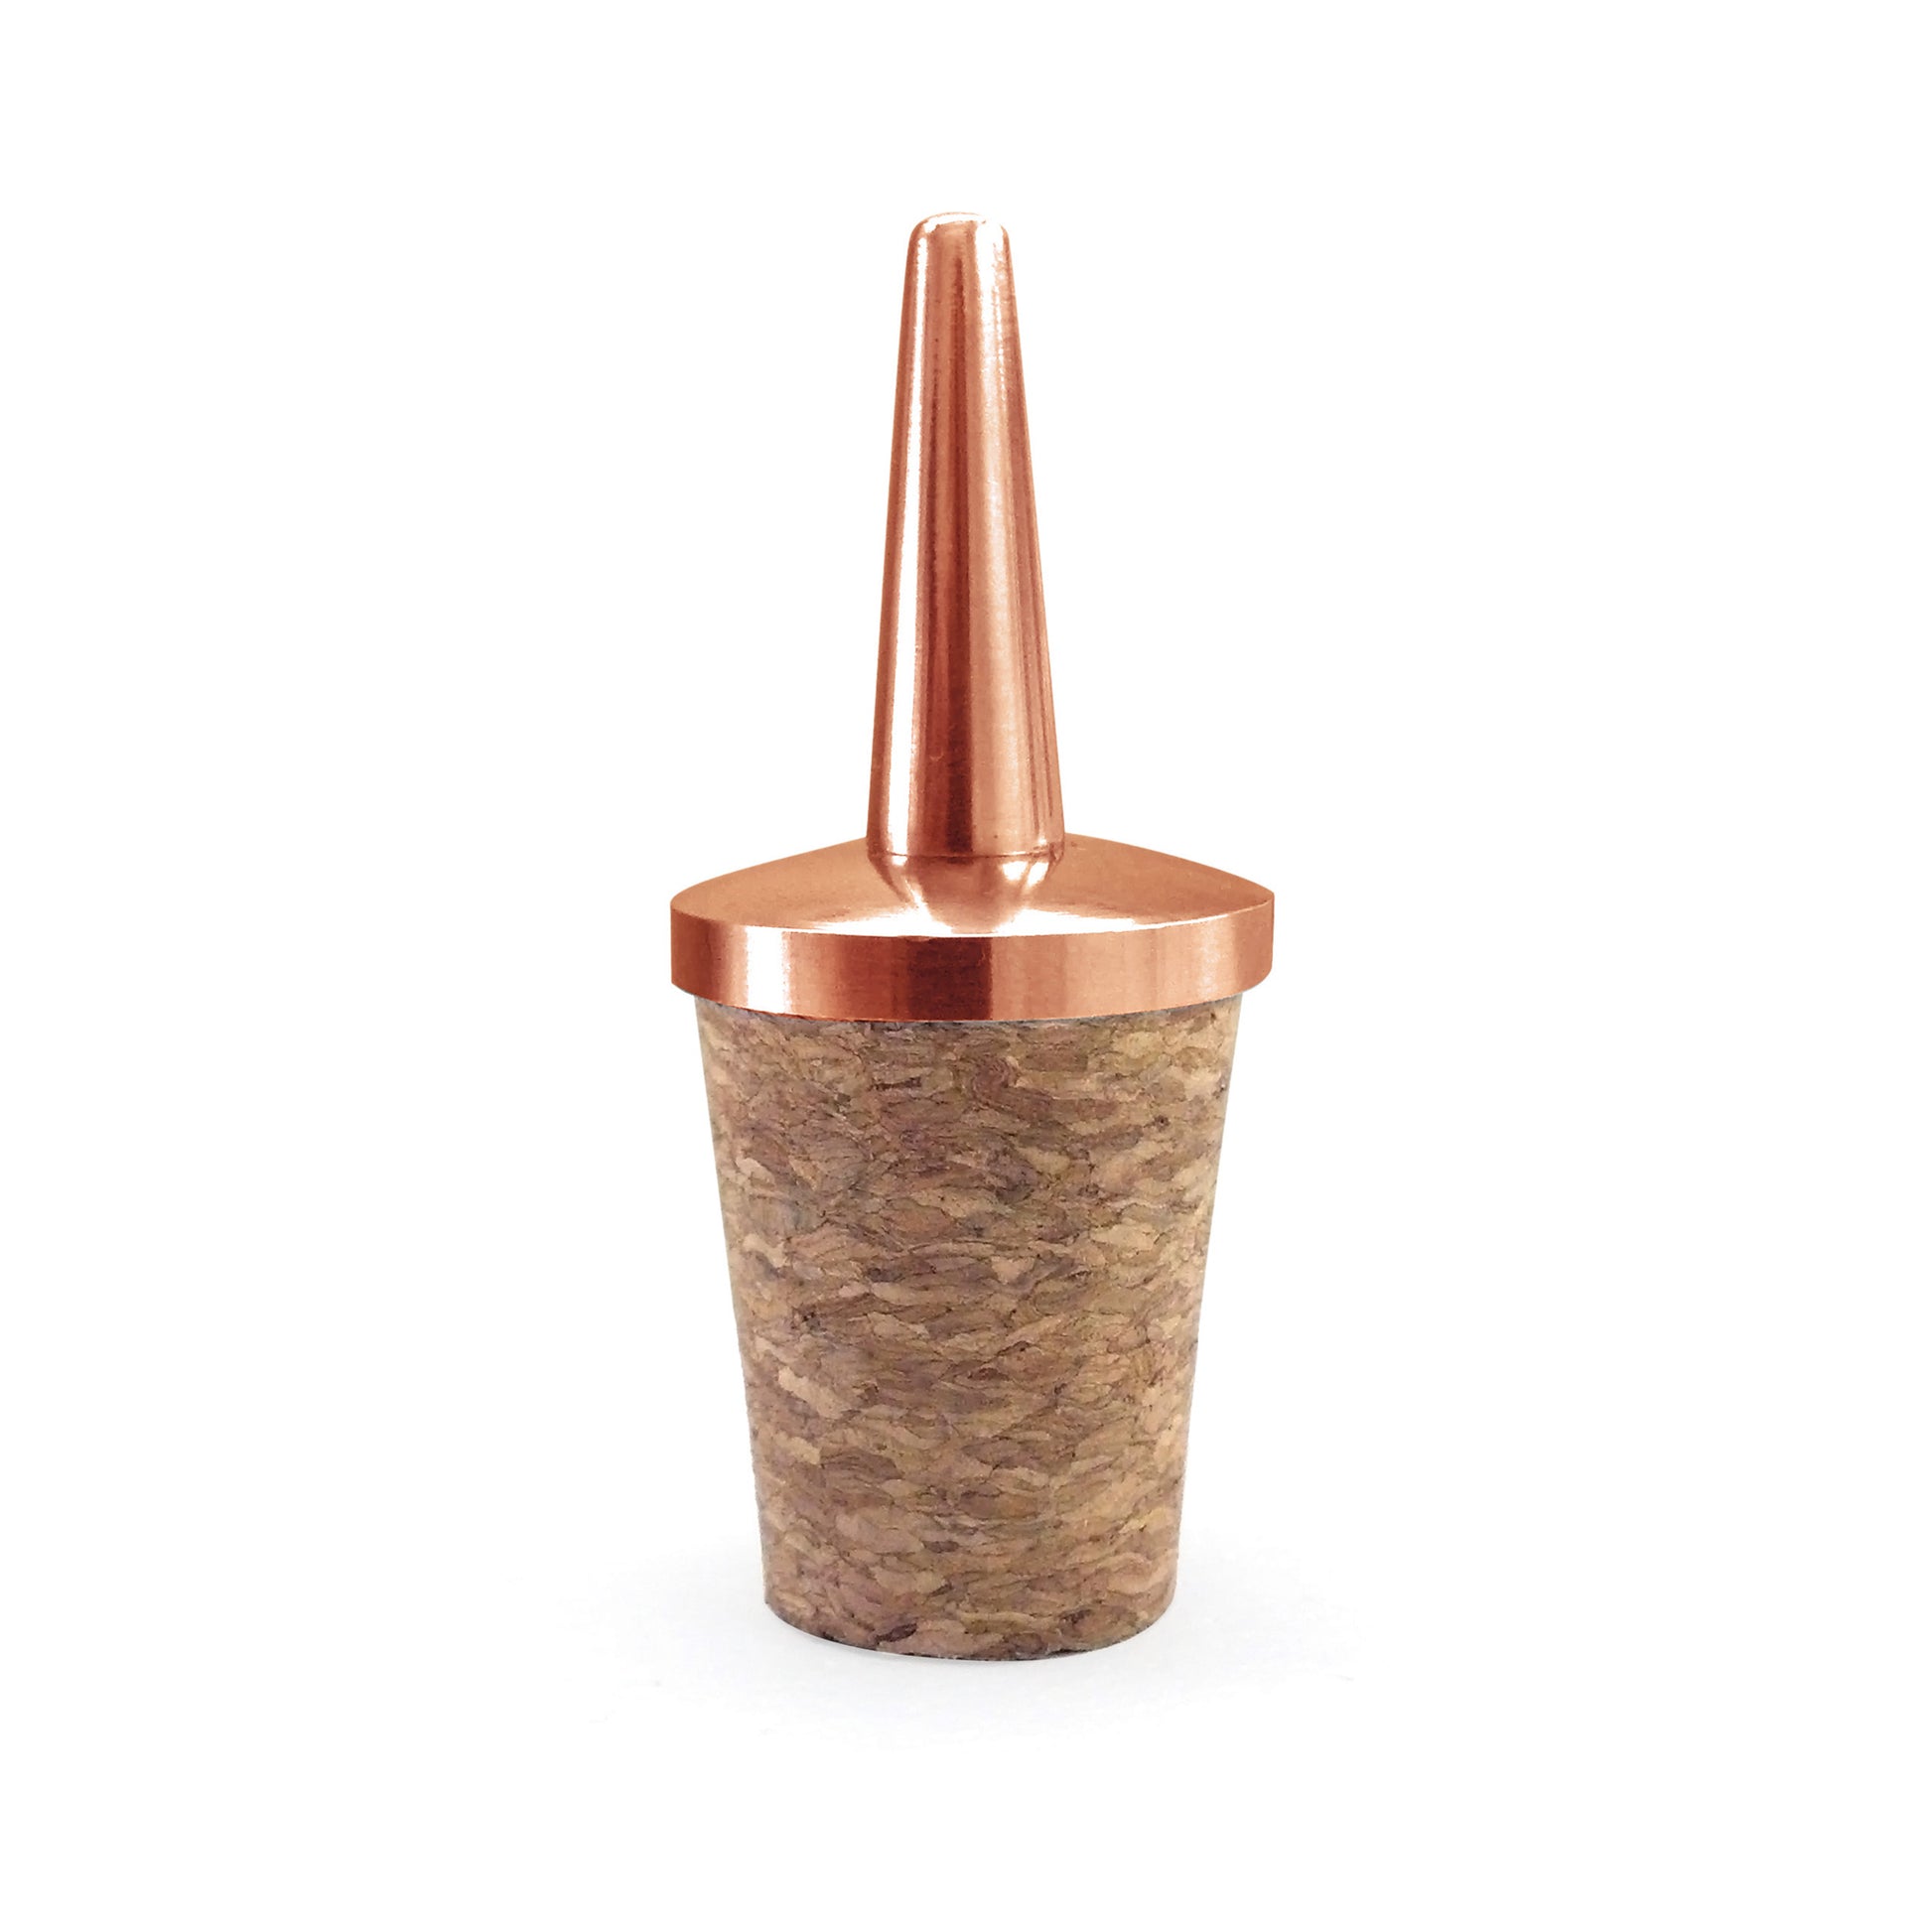 DASHER TOP – COPPER-PLATED / PACK OF 3